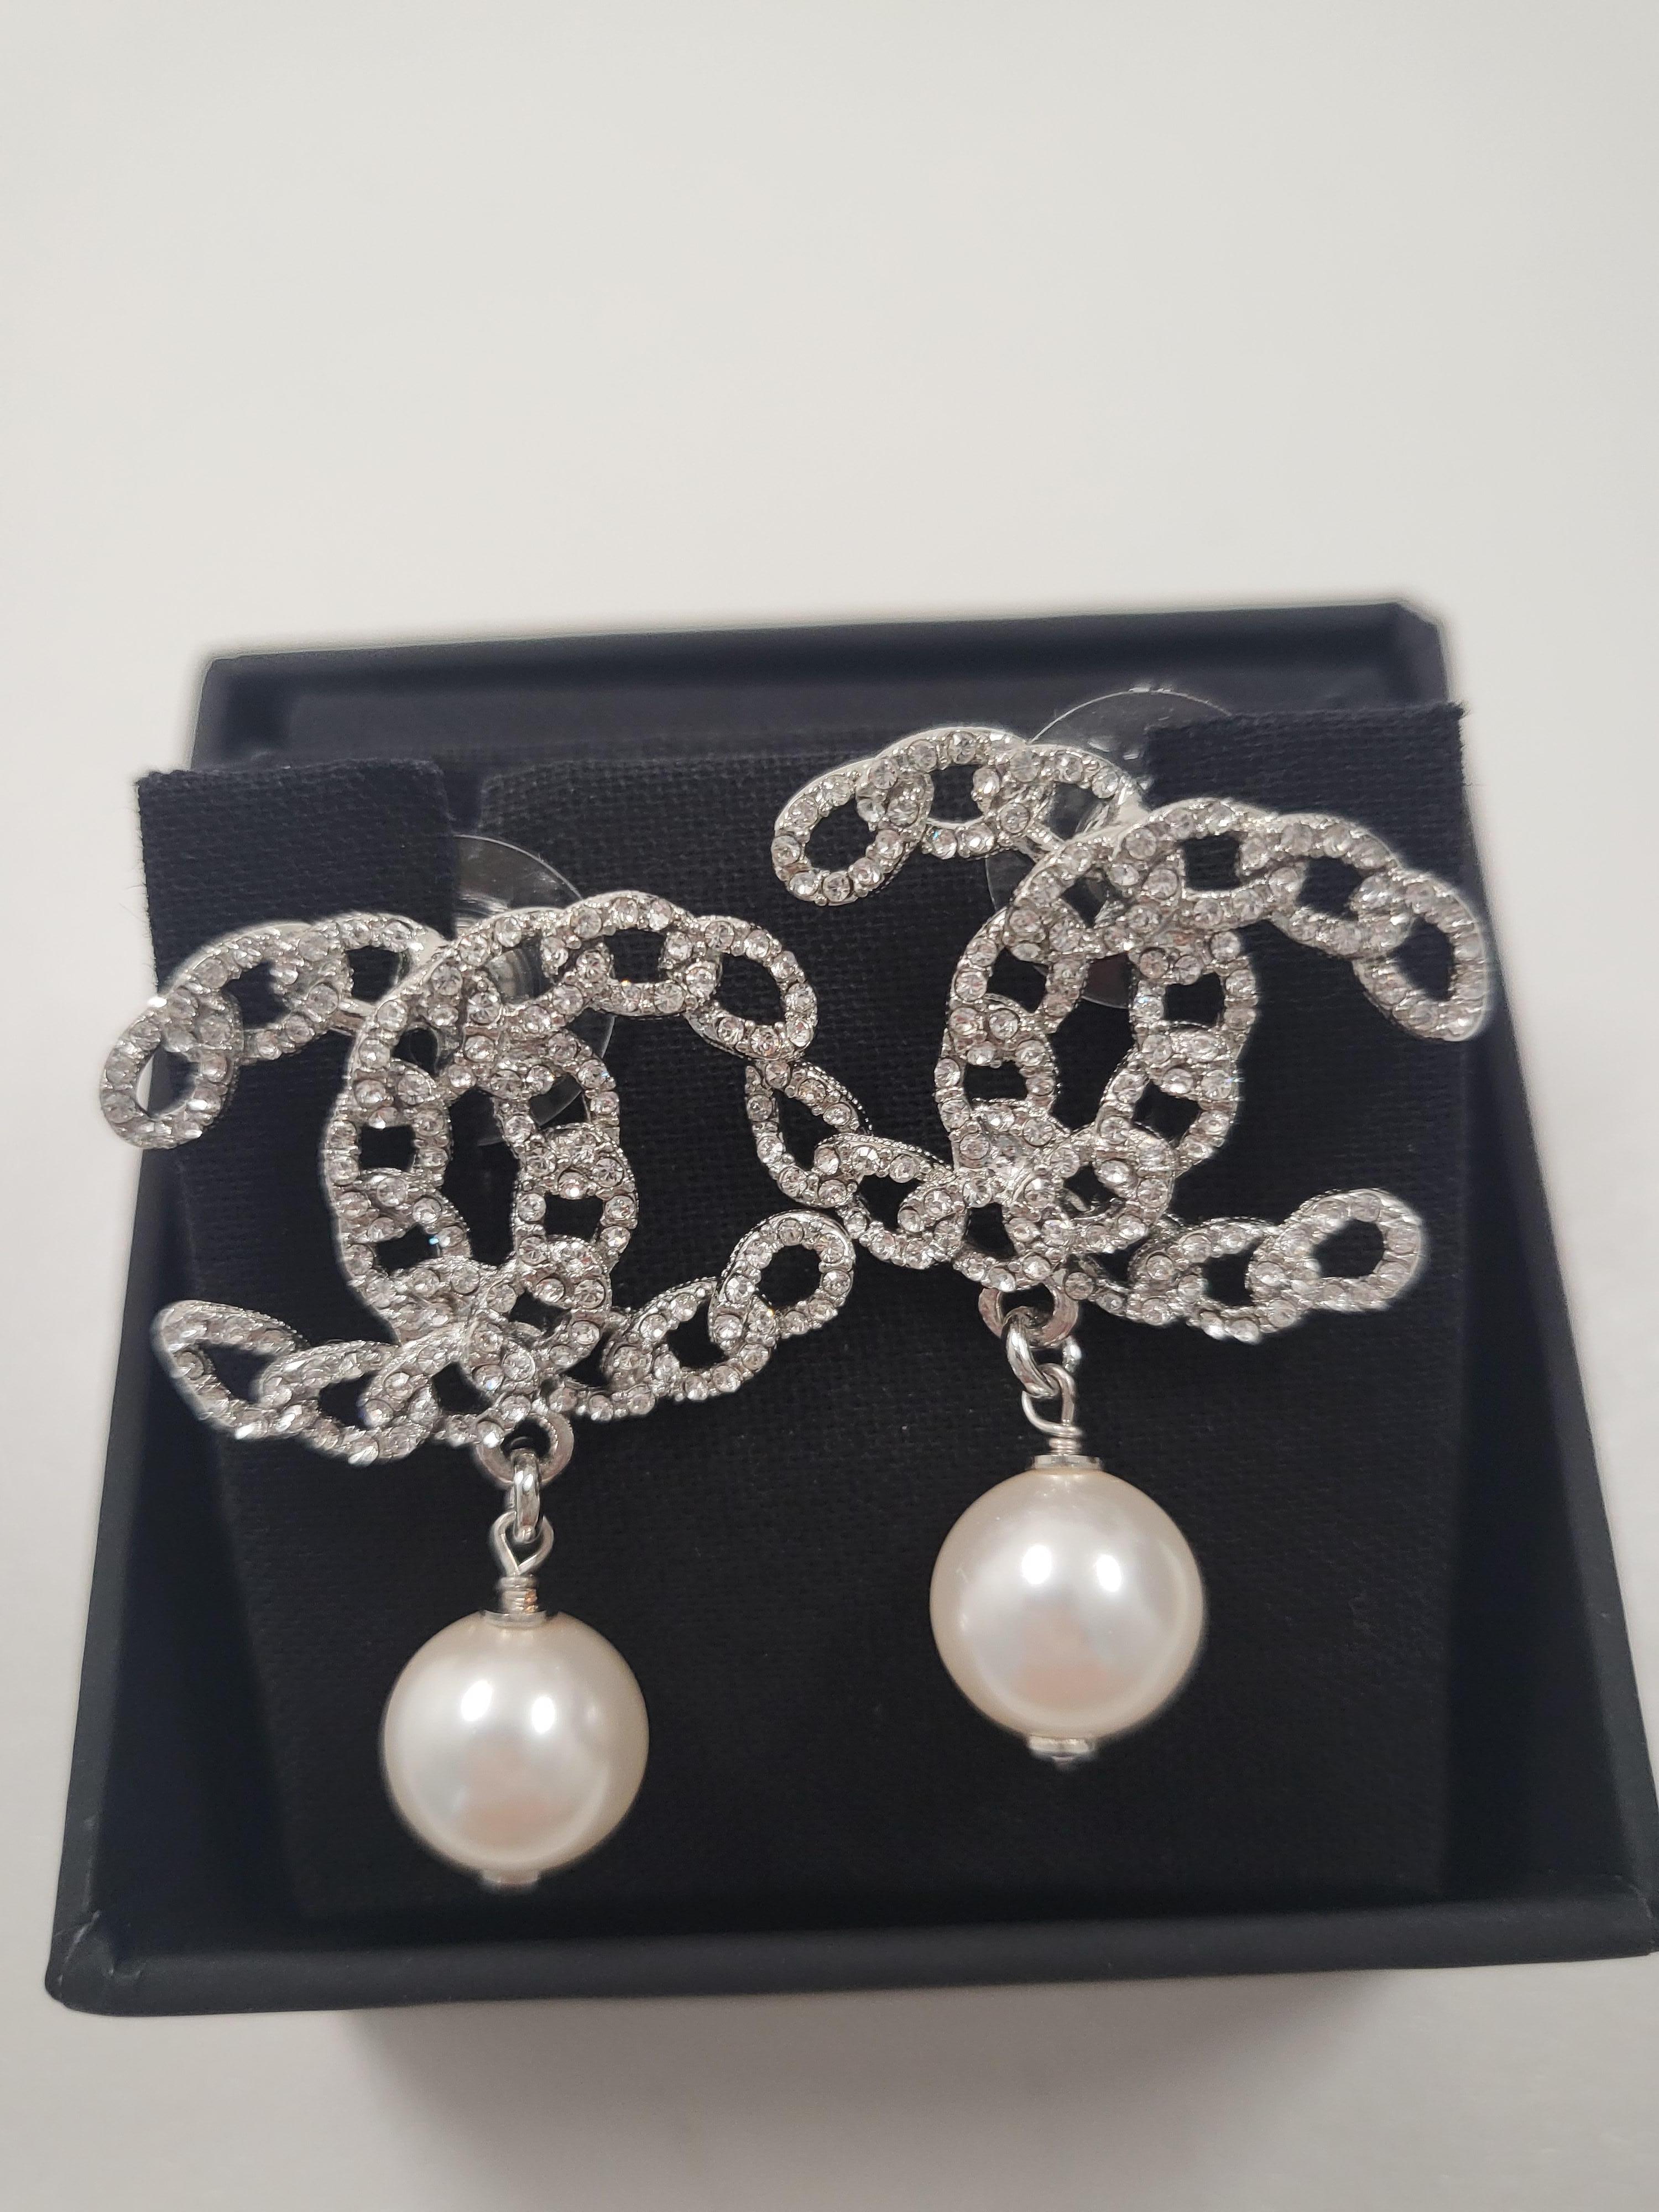 Indulge in the epitome of luxury and sophistication with the Chanel Large Rhinestone CC Drop Pearl Dangling Earrings. Exuding timeless elegance and unmistakable Chanel allure, these earrings are a true statement of style and refinement.

Crafted